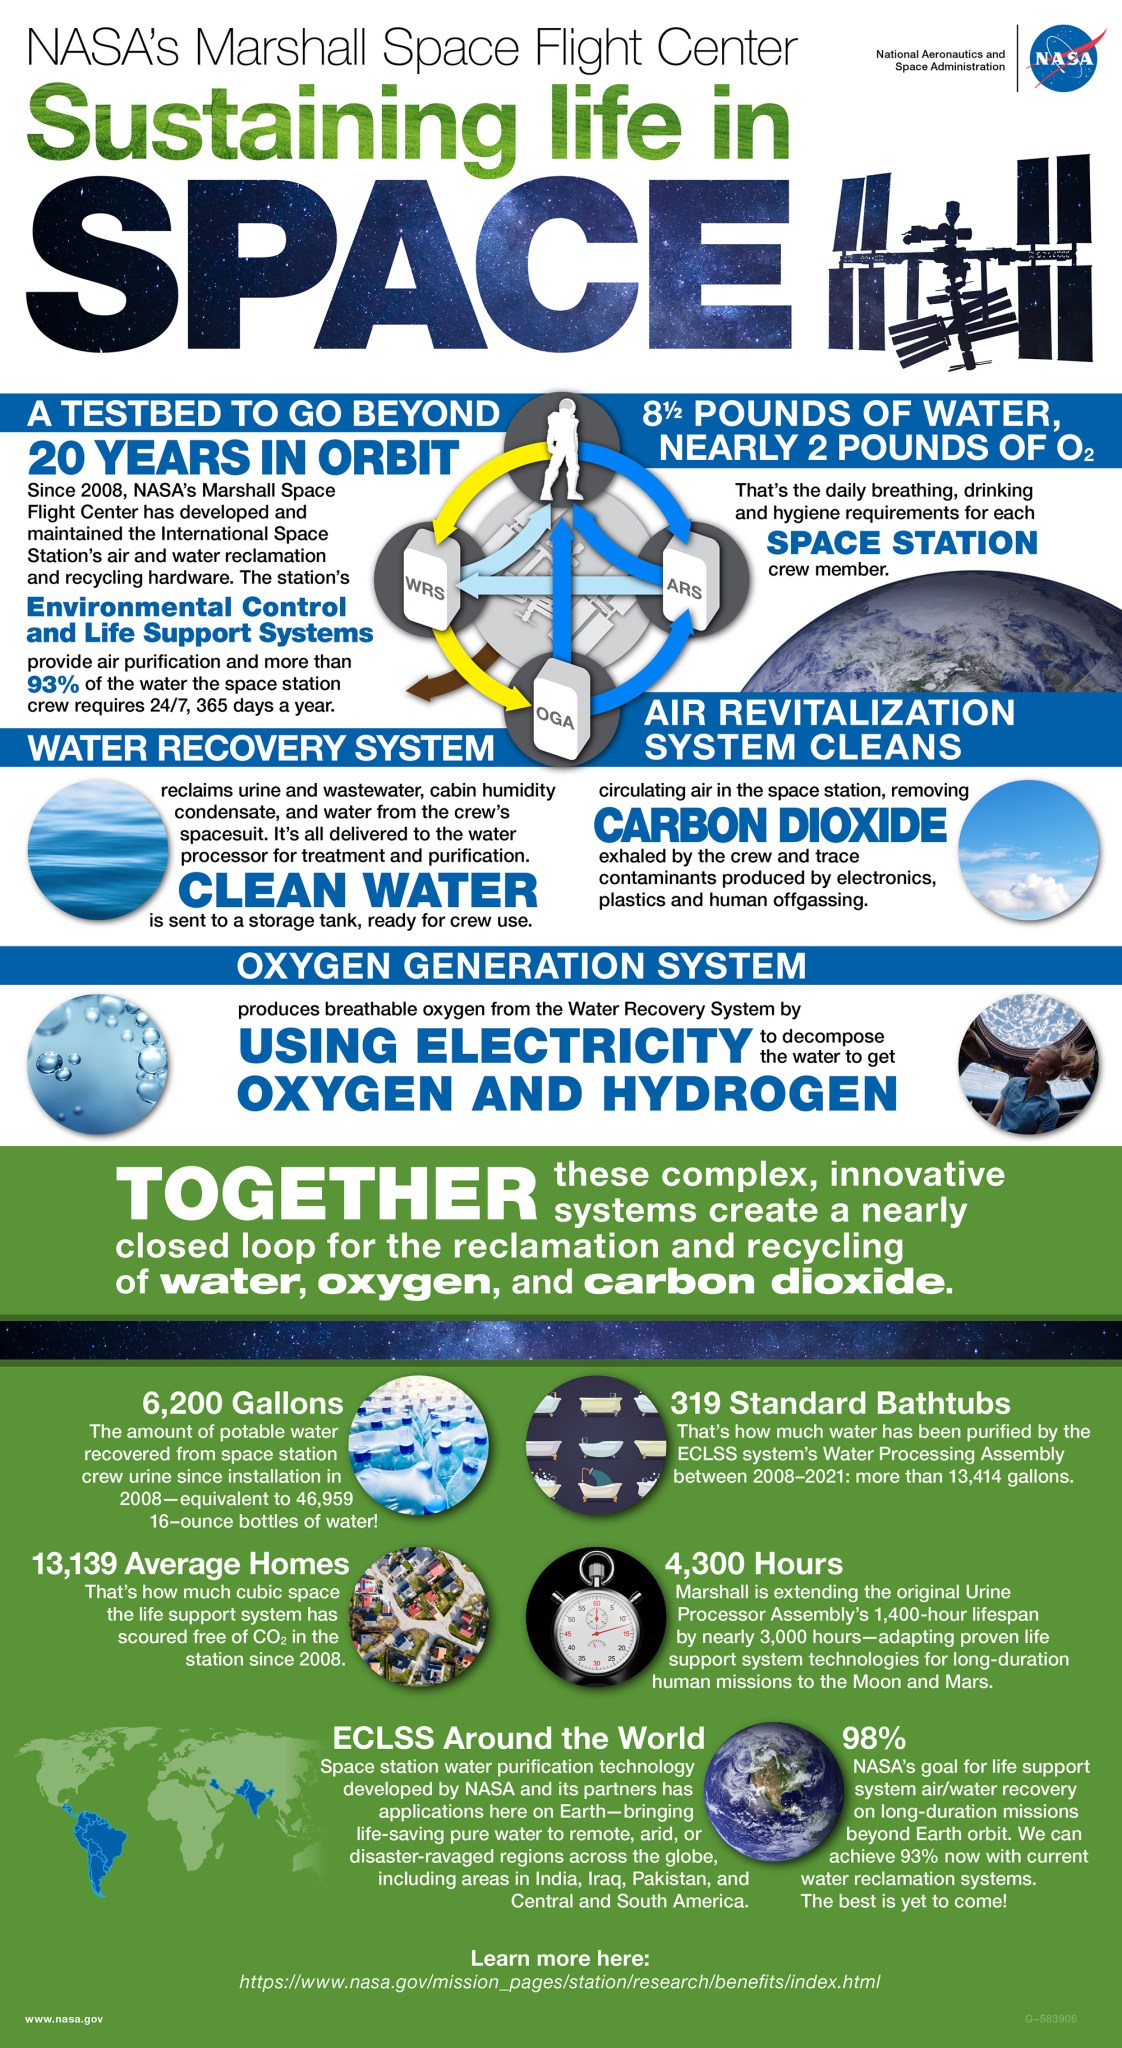 Advanced Life Support Systems on the International Space Station infographic.